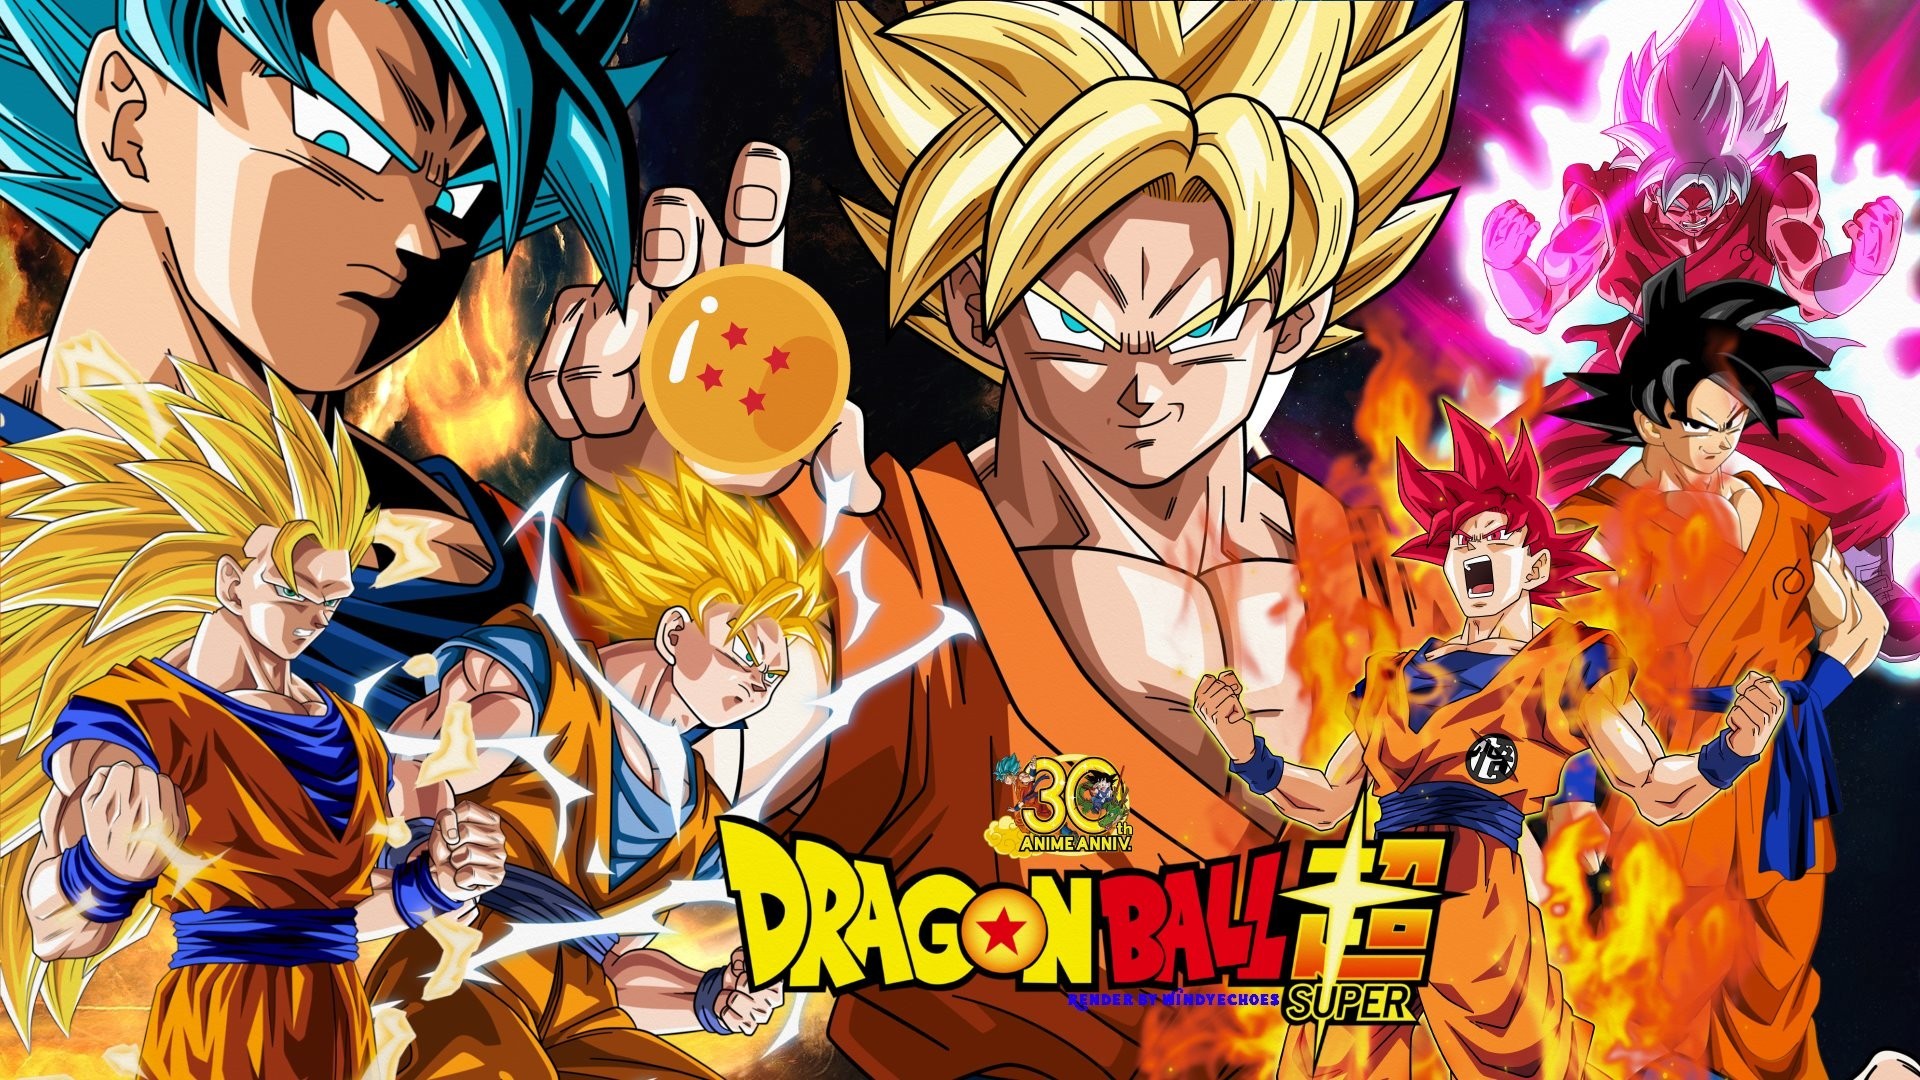 Goku HD Wallpaper with image resolution 1920x1080 pixel. You can make this wallpaper for your Desktop Computer Backgrounds, Mac Wallpapers, Android Lock screen or iPhone Screensavers